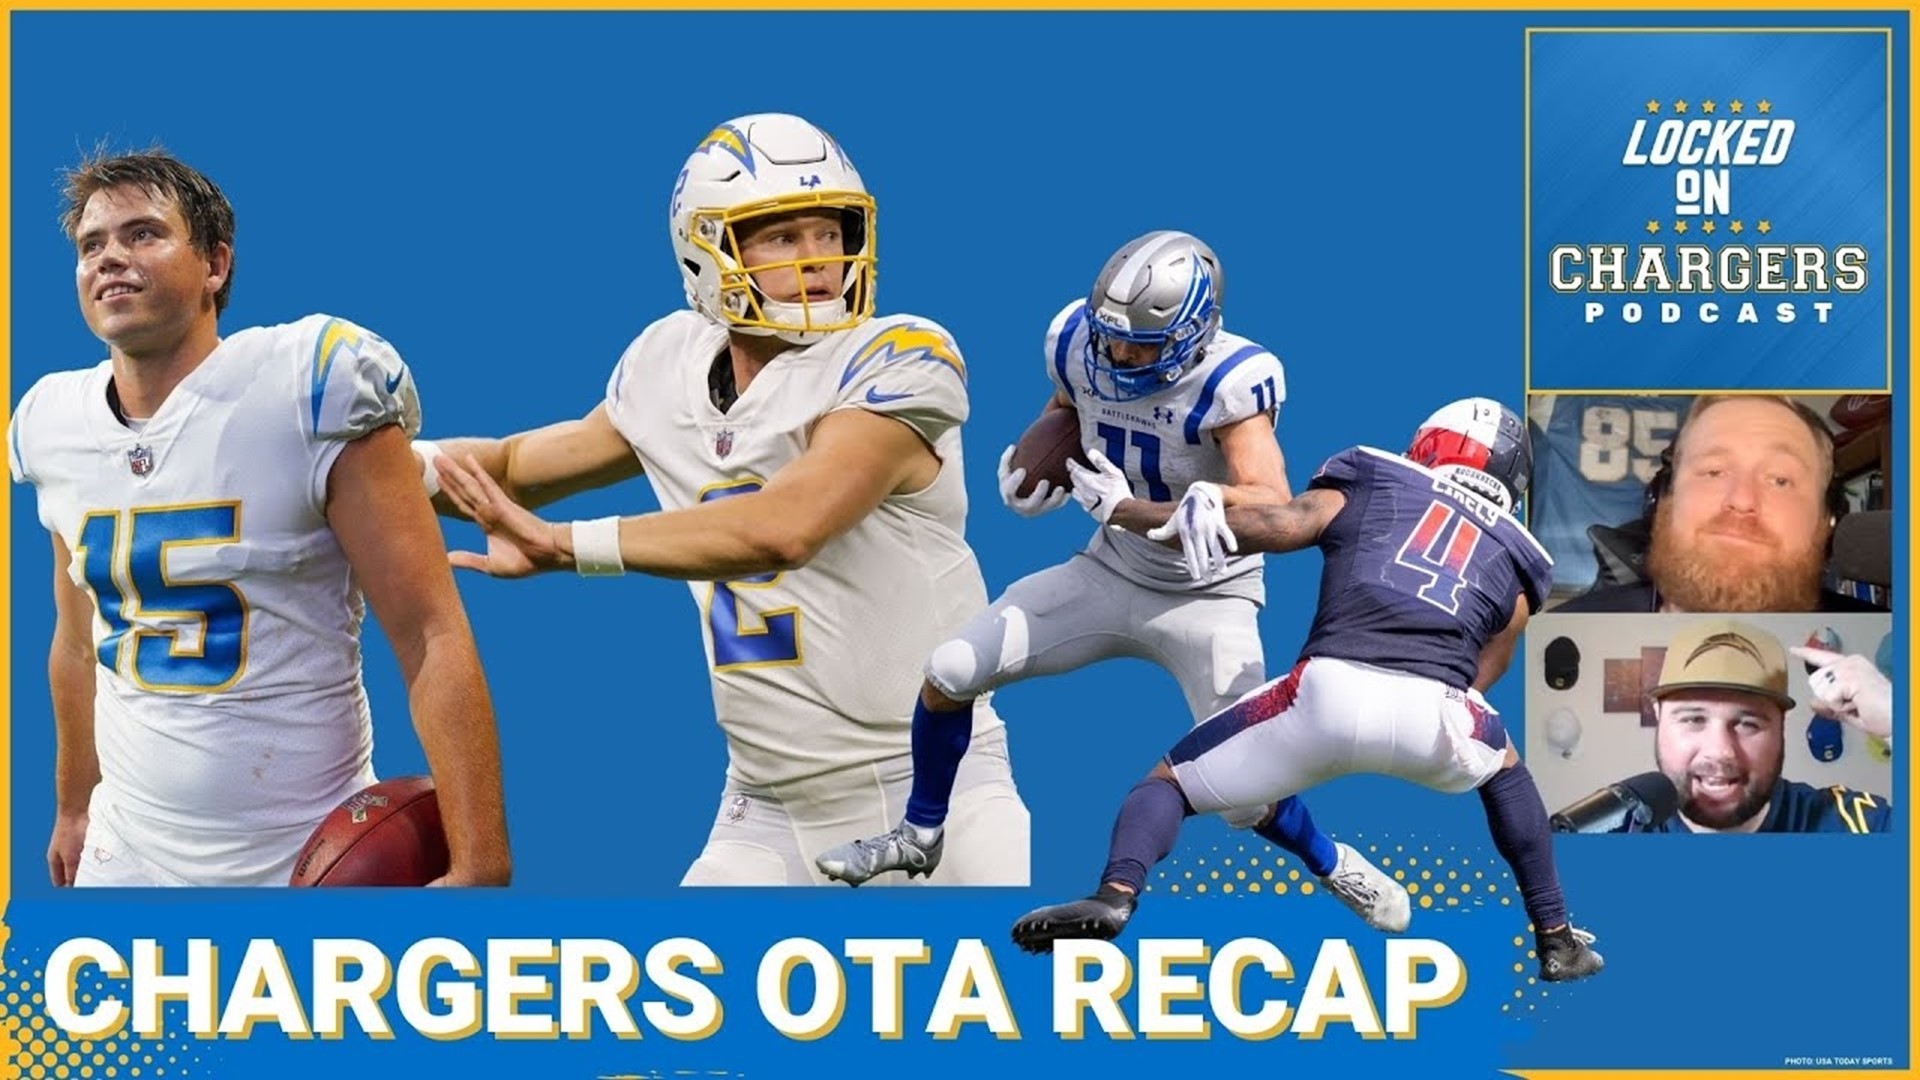 Easton Stick was slinging it at the Los Angeles Chargers OTAs this week and is off to a great start as the primary backup quarterback.